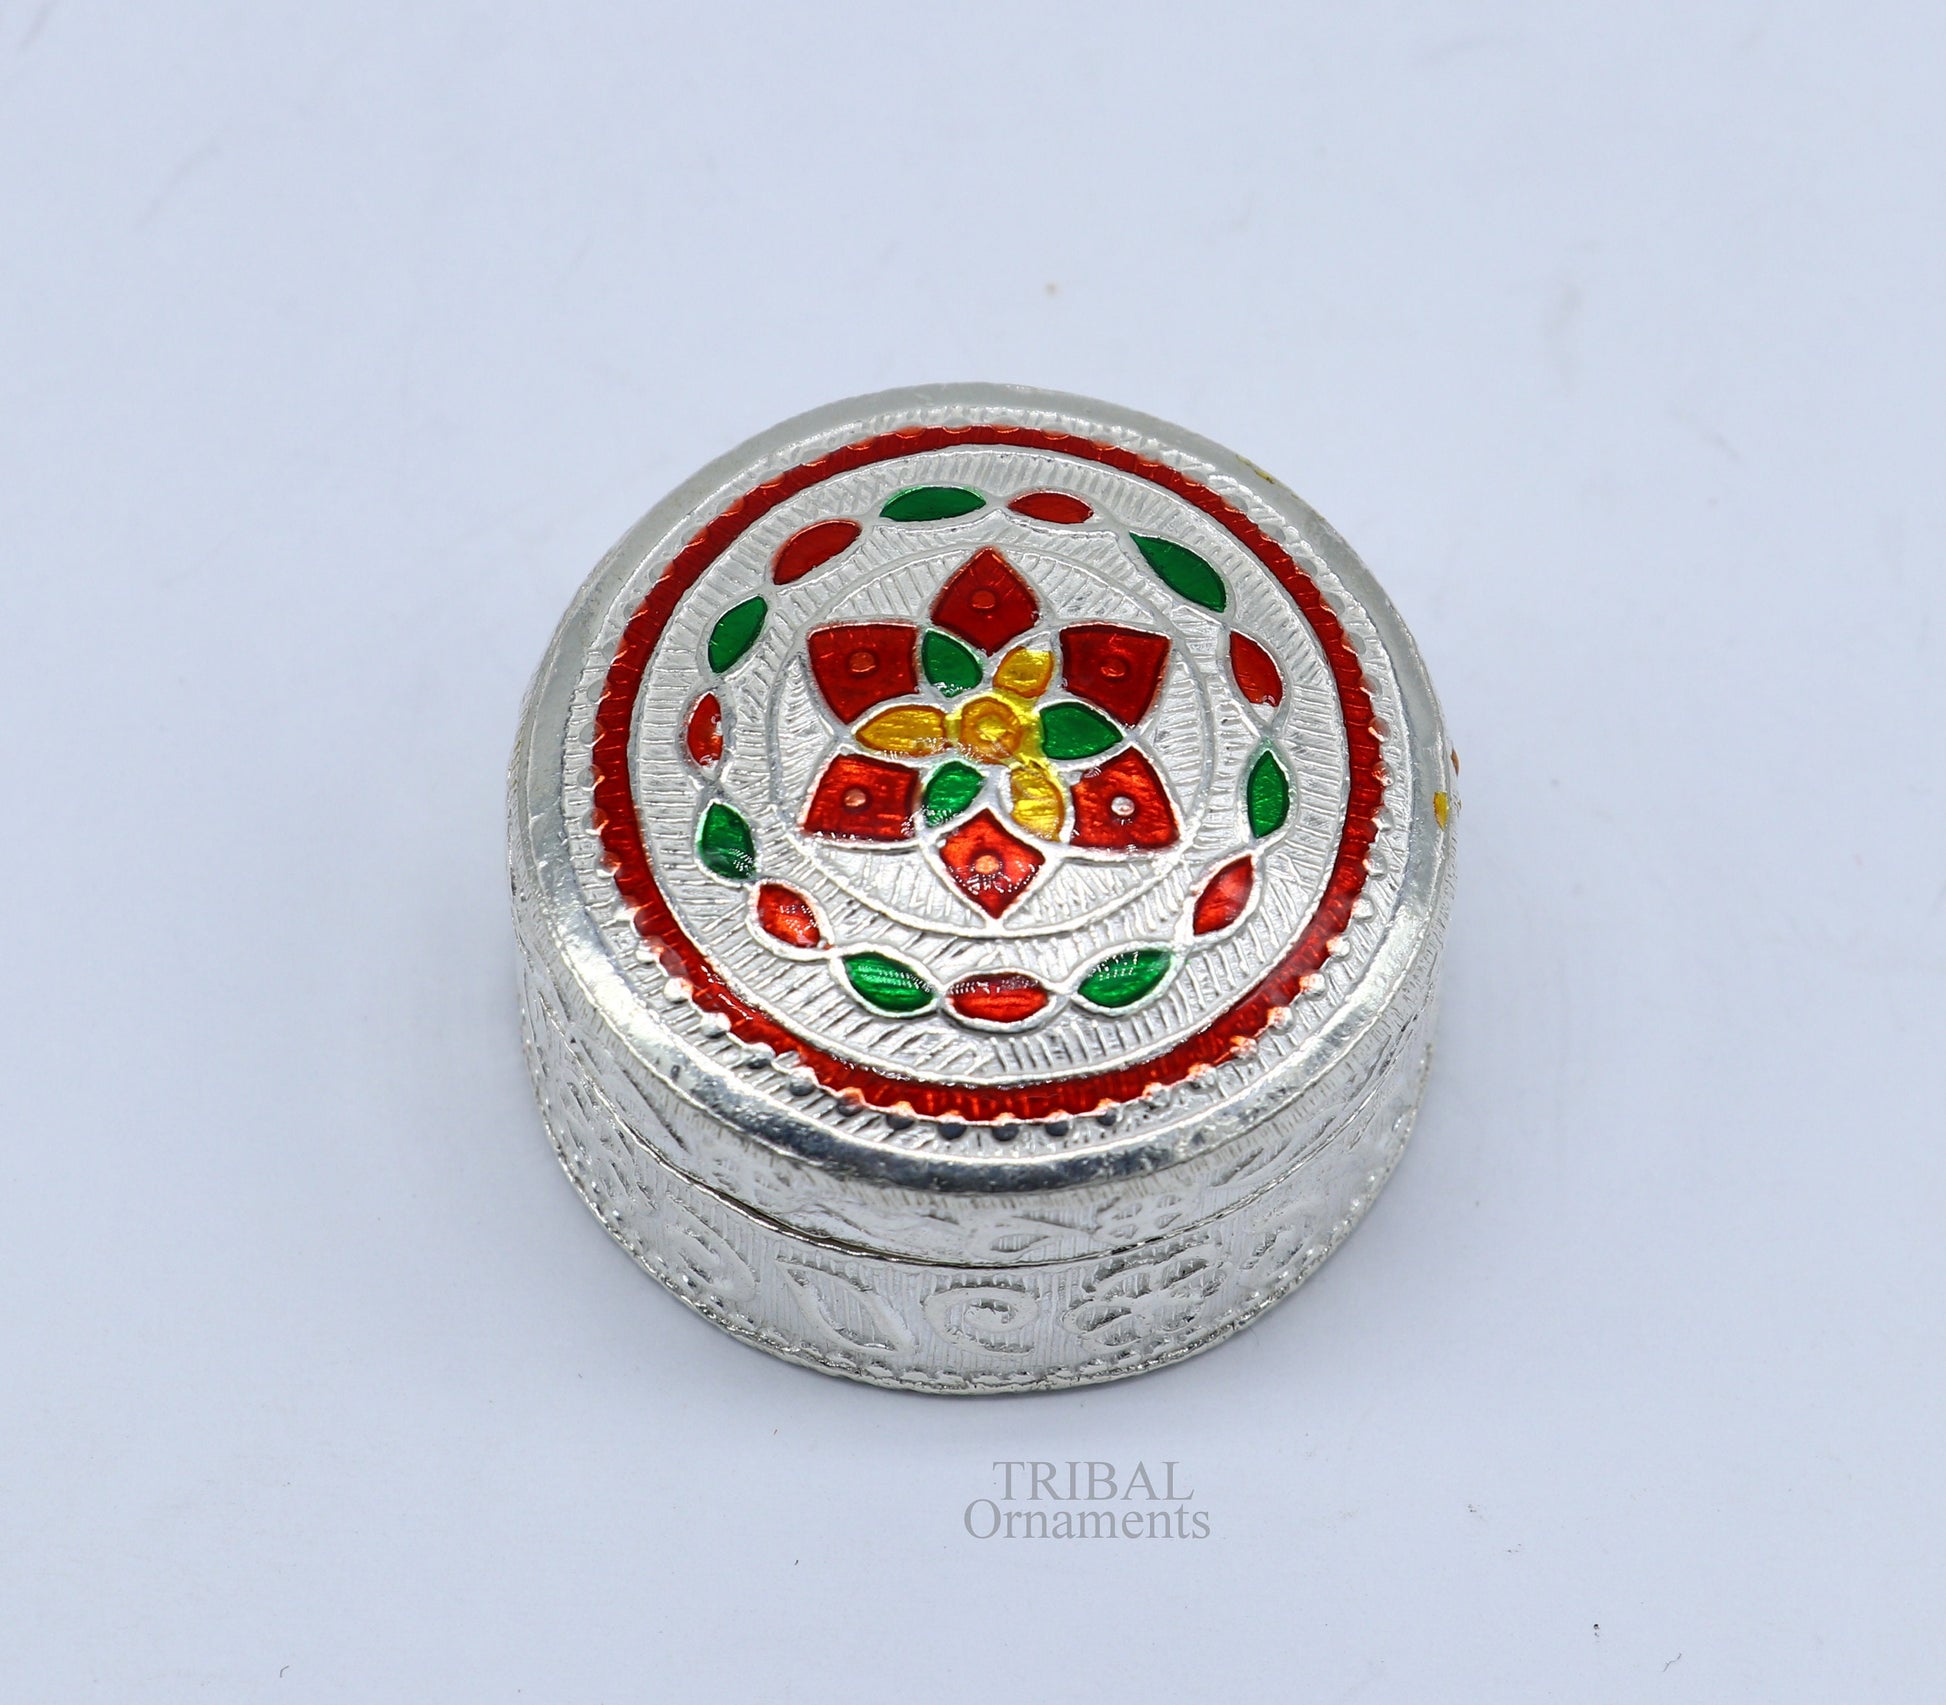 925 sterling silver trinket box, kumkum box/ casket box bridal gifts enamel jewelry box collection, container box, jewelry box art stb355 - TRIBAL ORNAMENTS